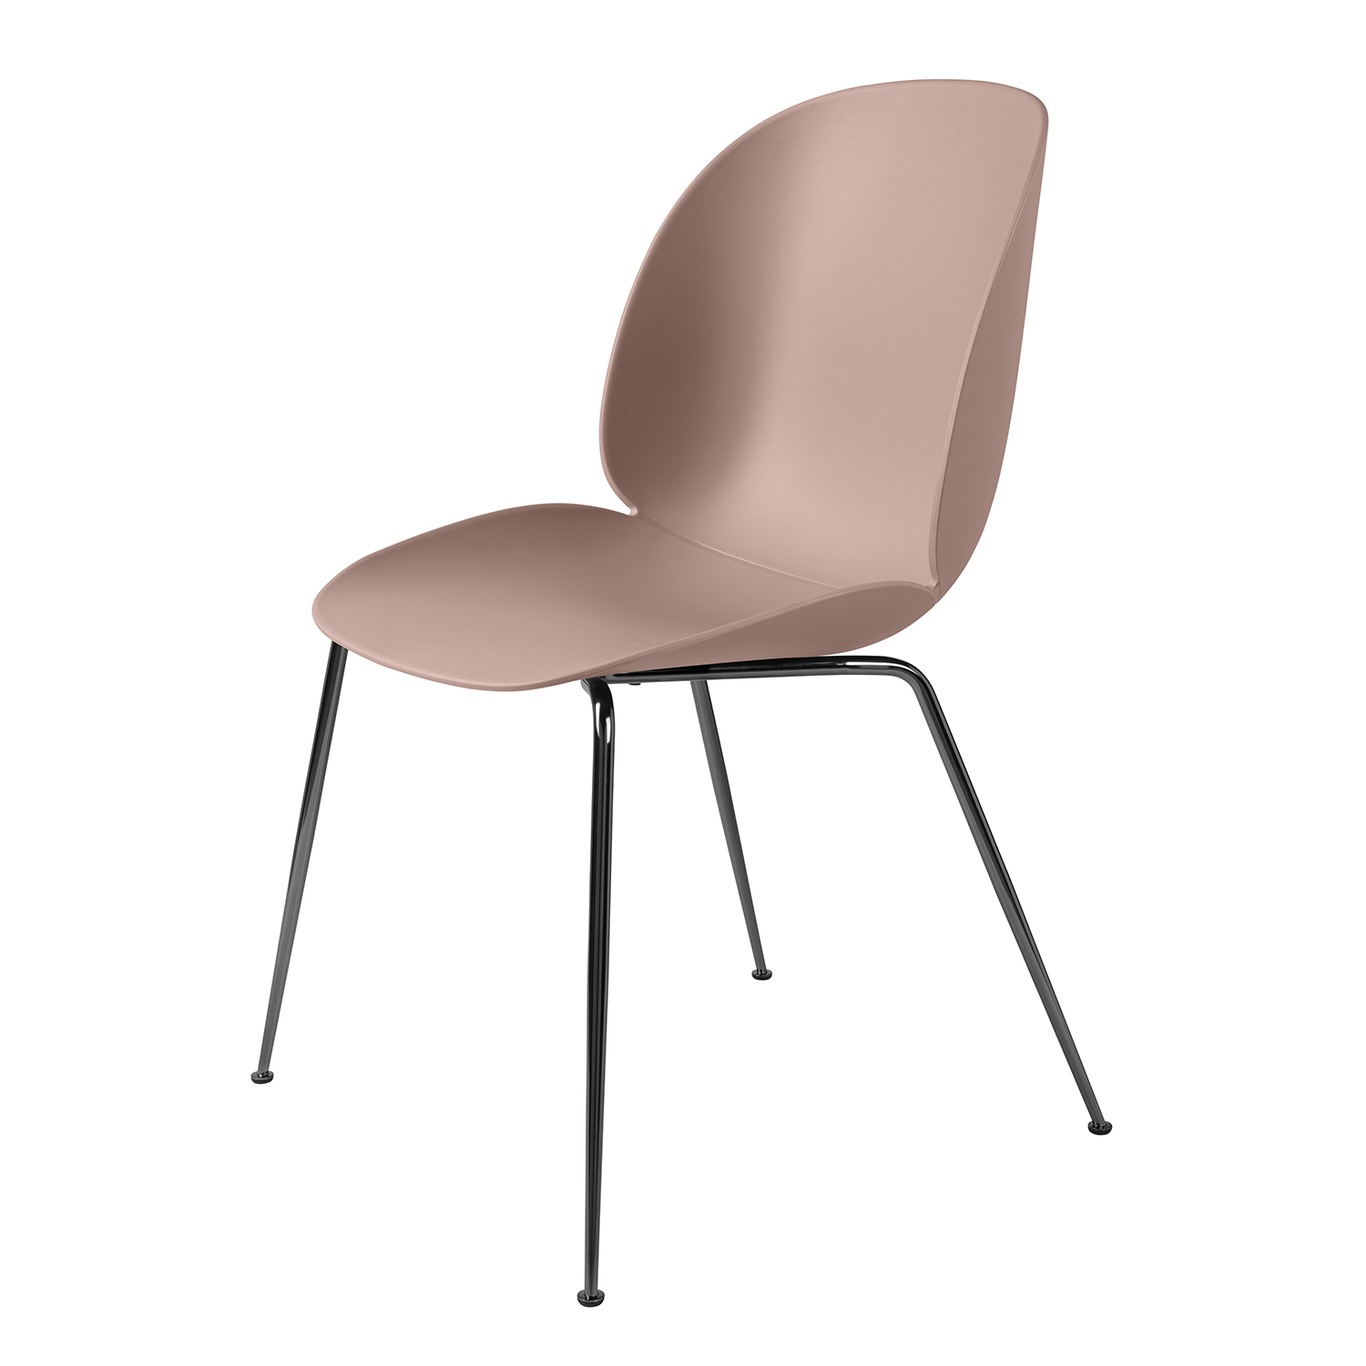 Beetle Dining Chair Unupholstered, Conic Base Black Chromed, Sweet Pink